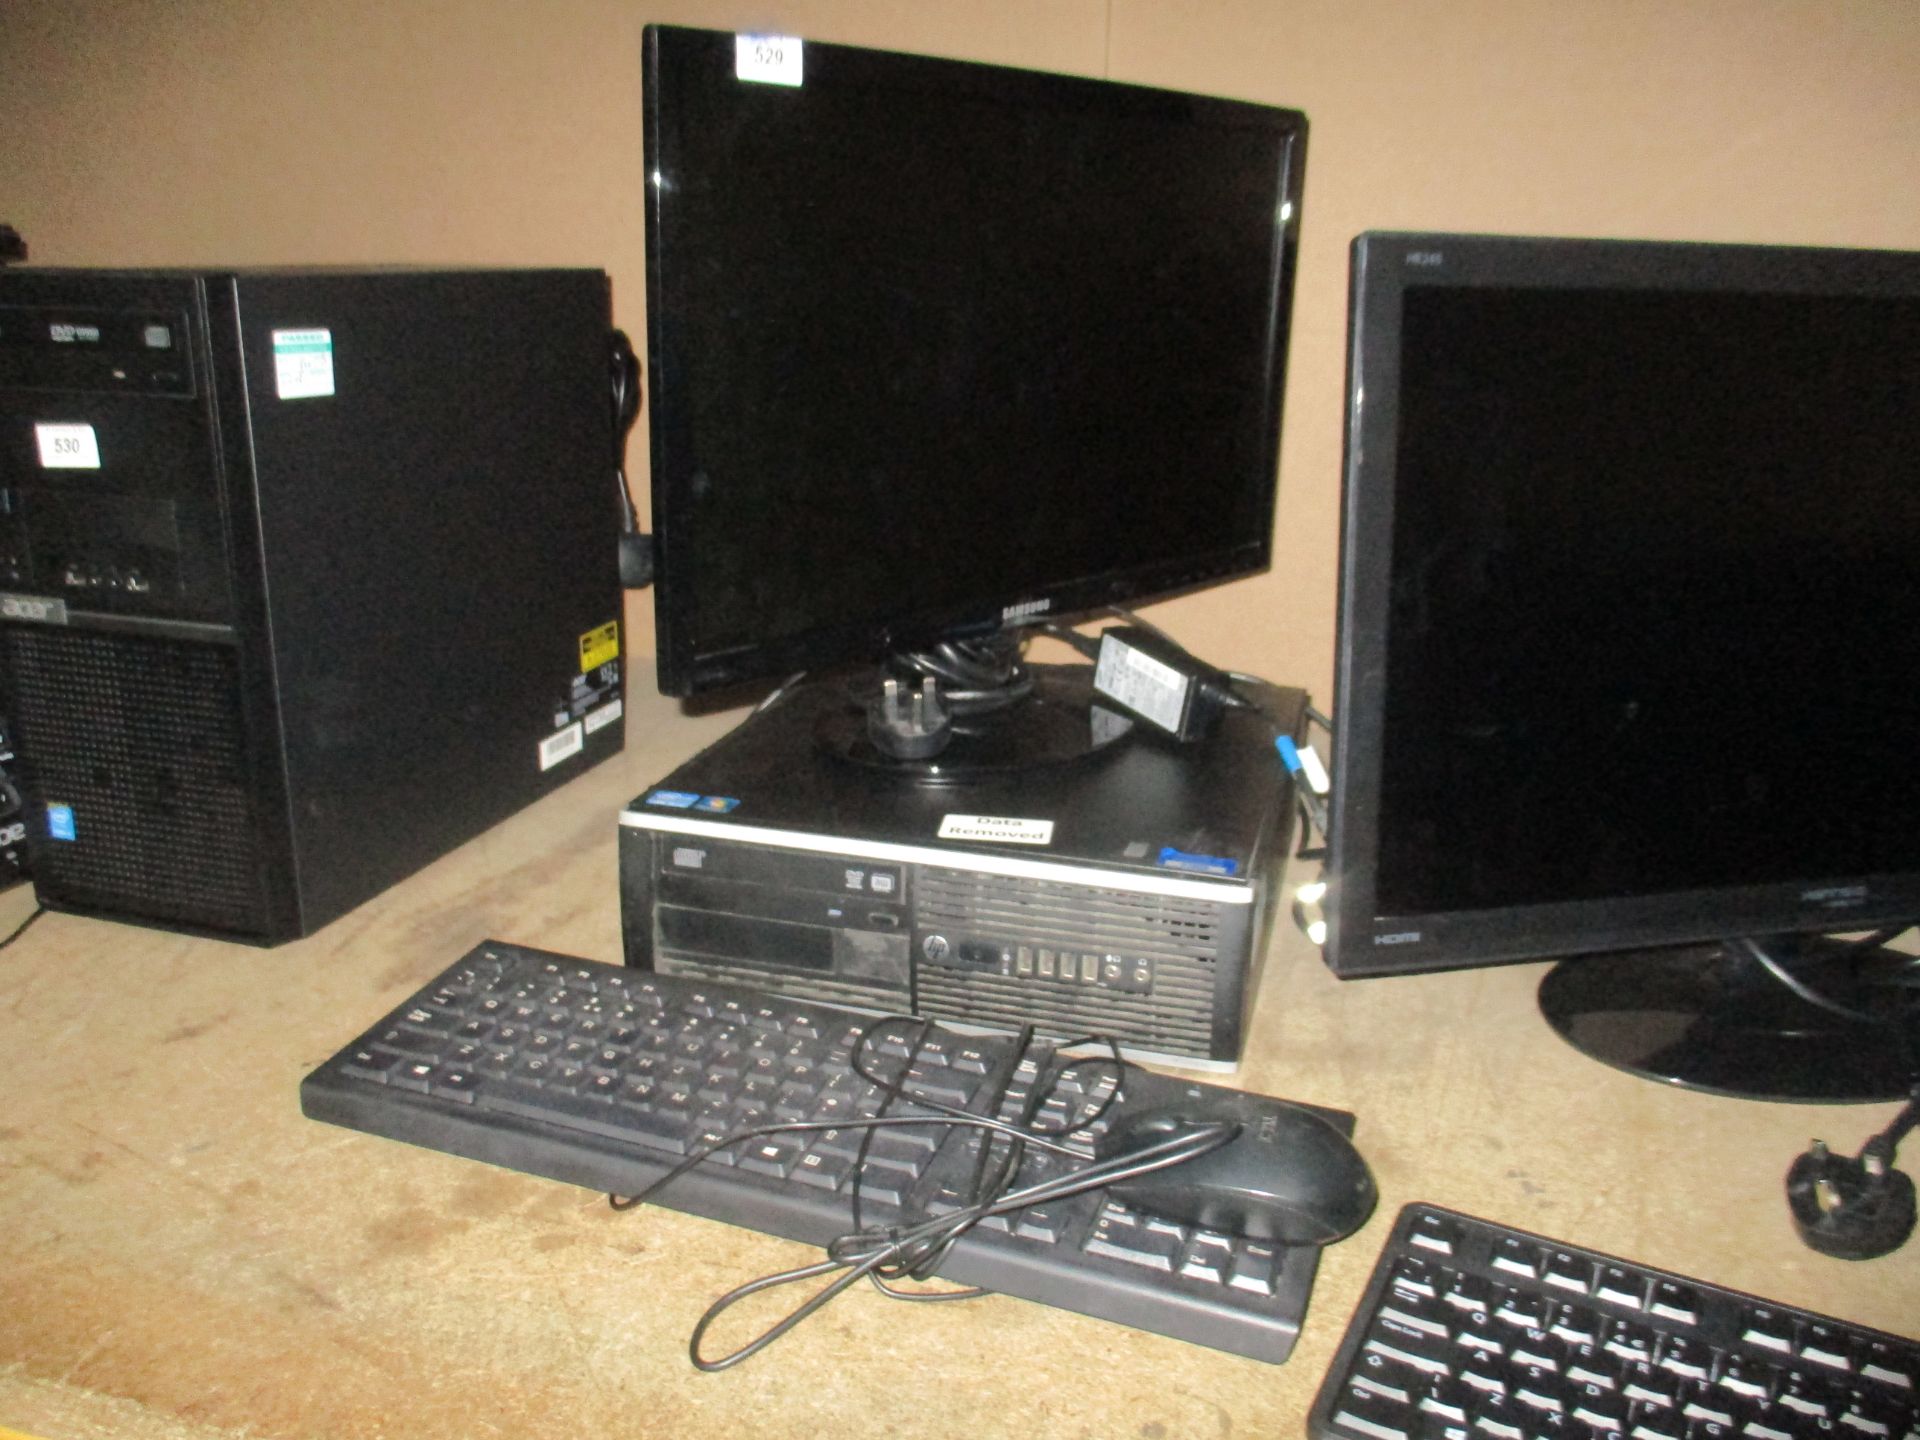 A HP desktop computer - power lead, complete with a Samsung 22" LCD monitor,